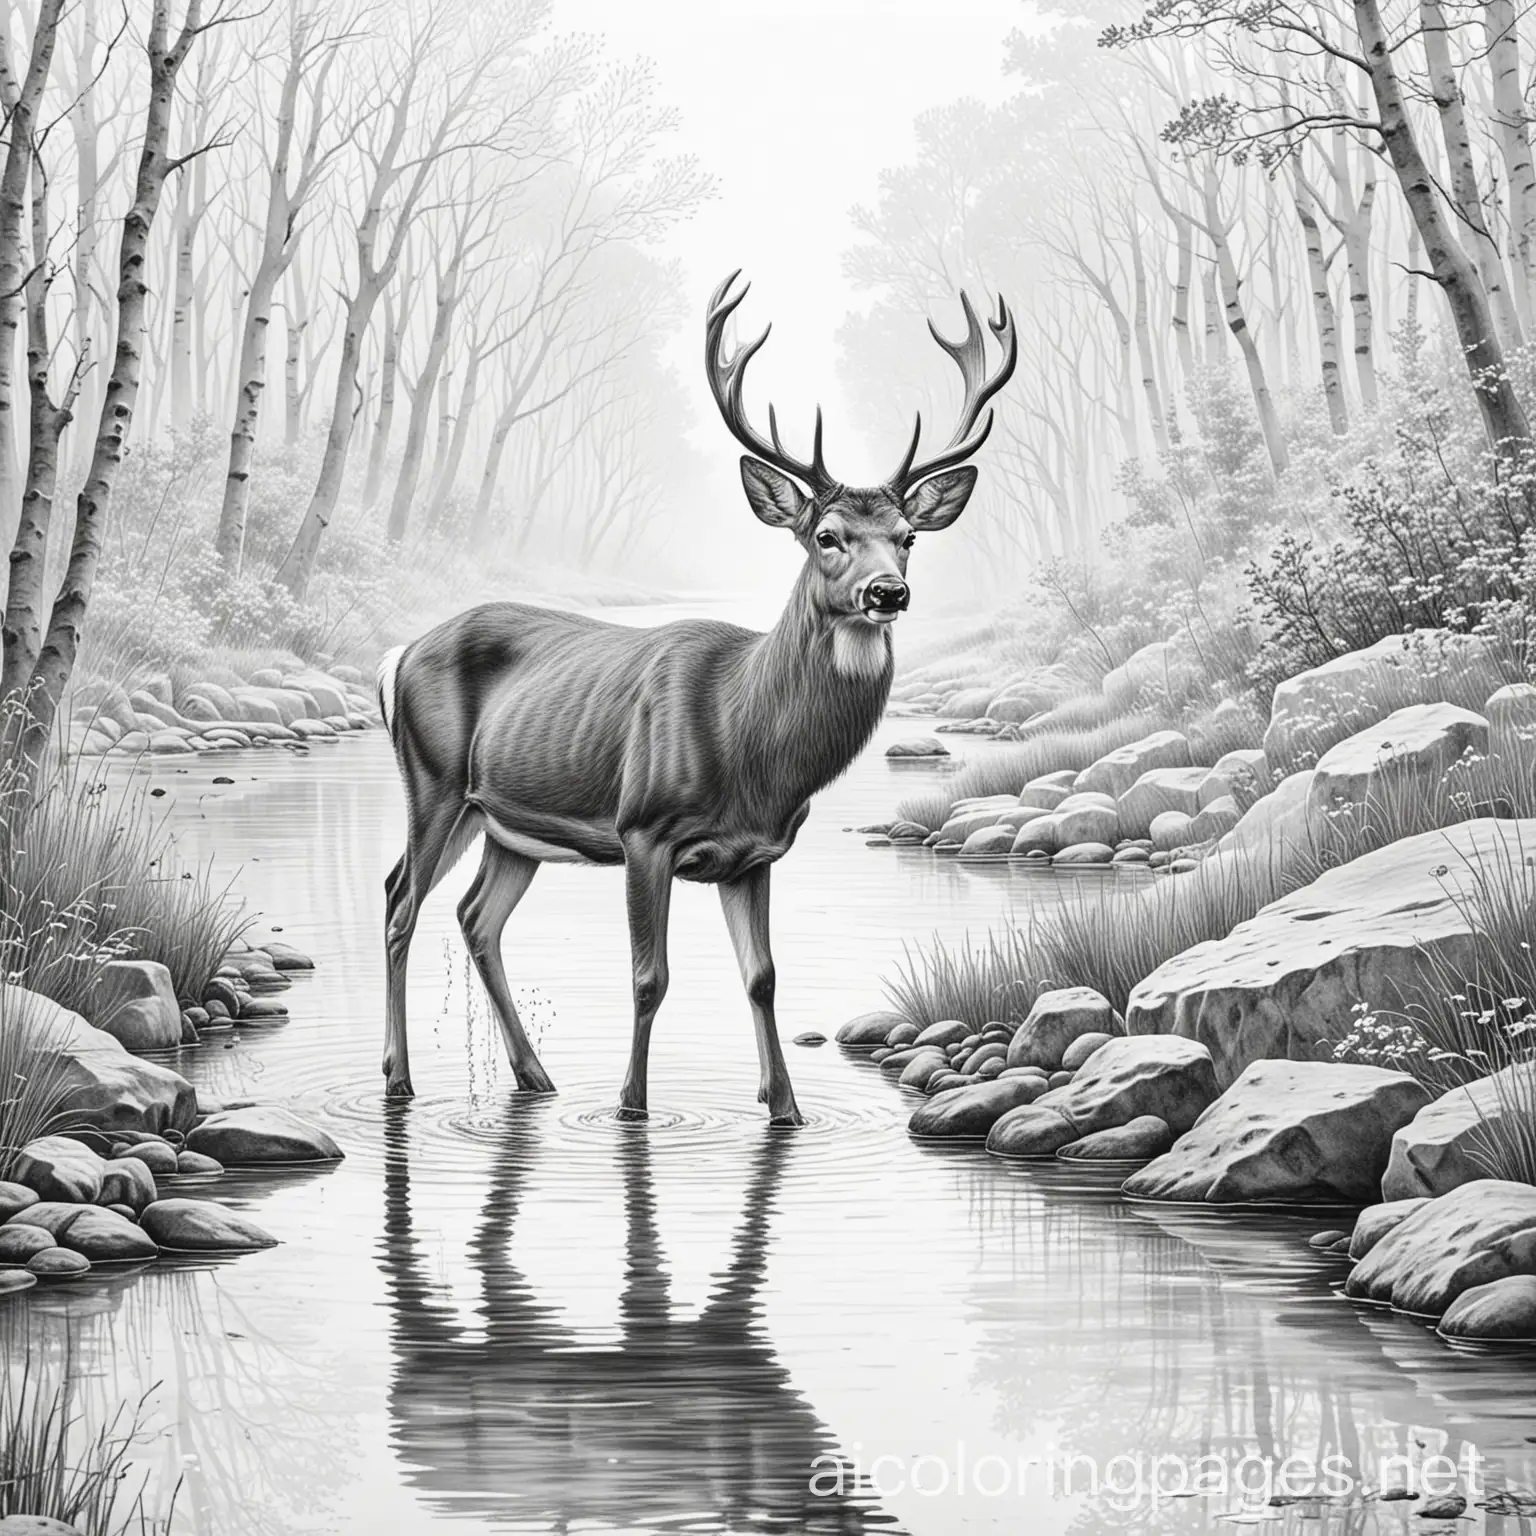 picture of deer drinking water at brook
, Coloring Page, black and white, line art, white background, Simplicity, Ample White Space. The background of the coloring page is plain white to make it easy for young children to color within the lines. The outlines of all the subjects are easy to distinguish, making it simple for kids to color without too much difficulty